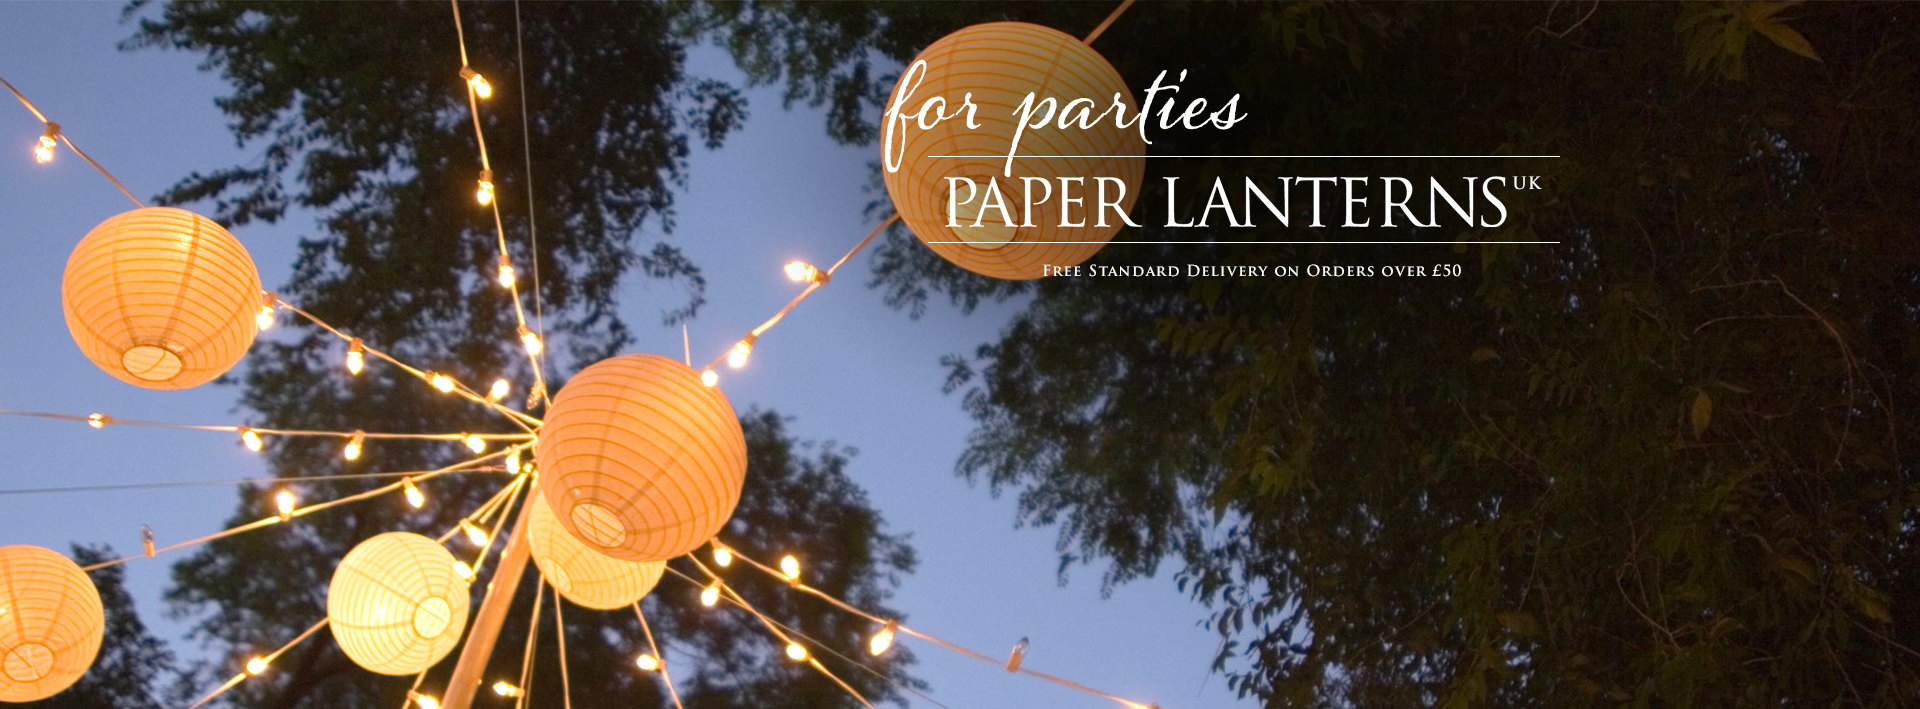 Paper Lanterns for parties